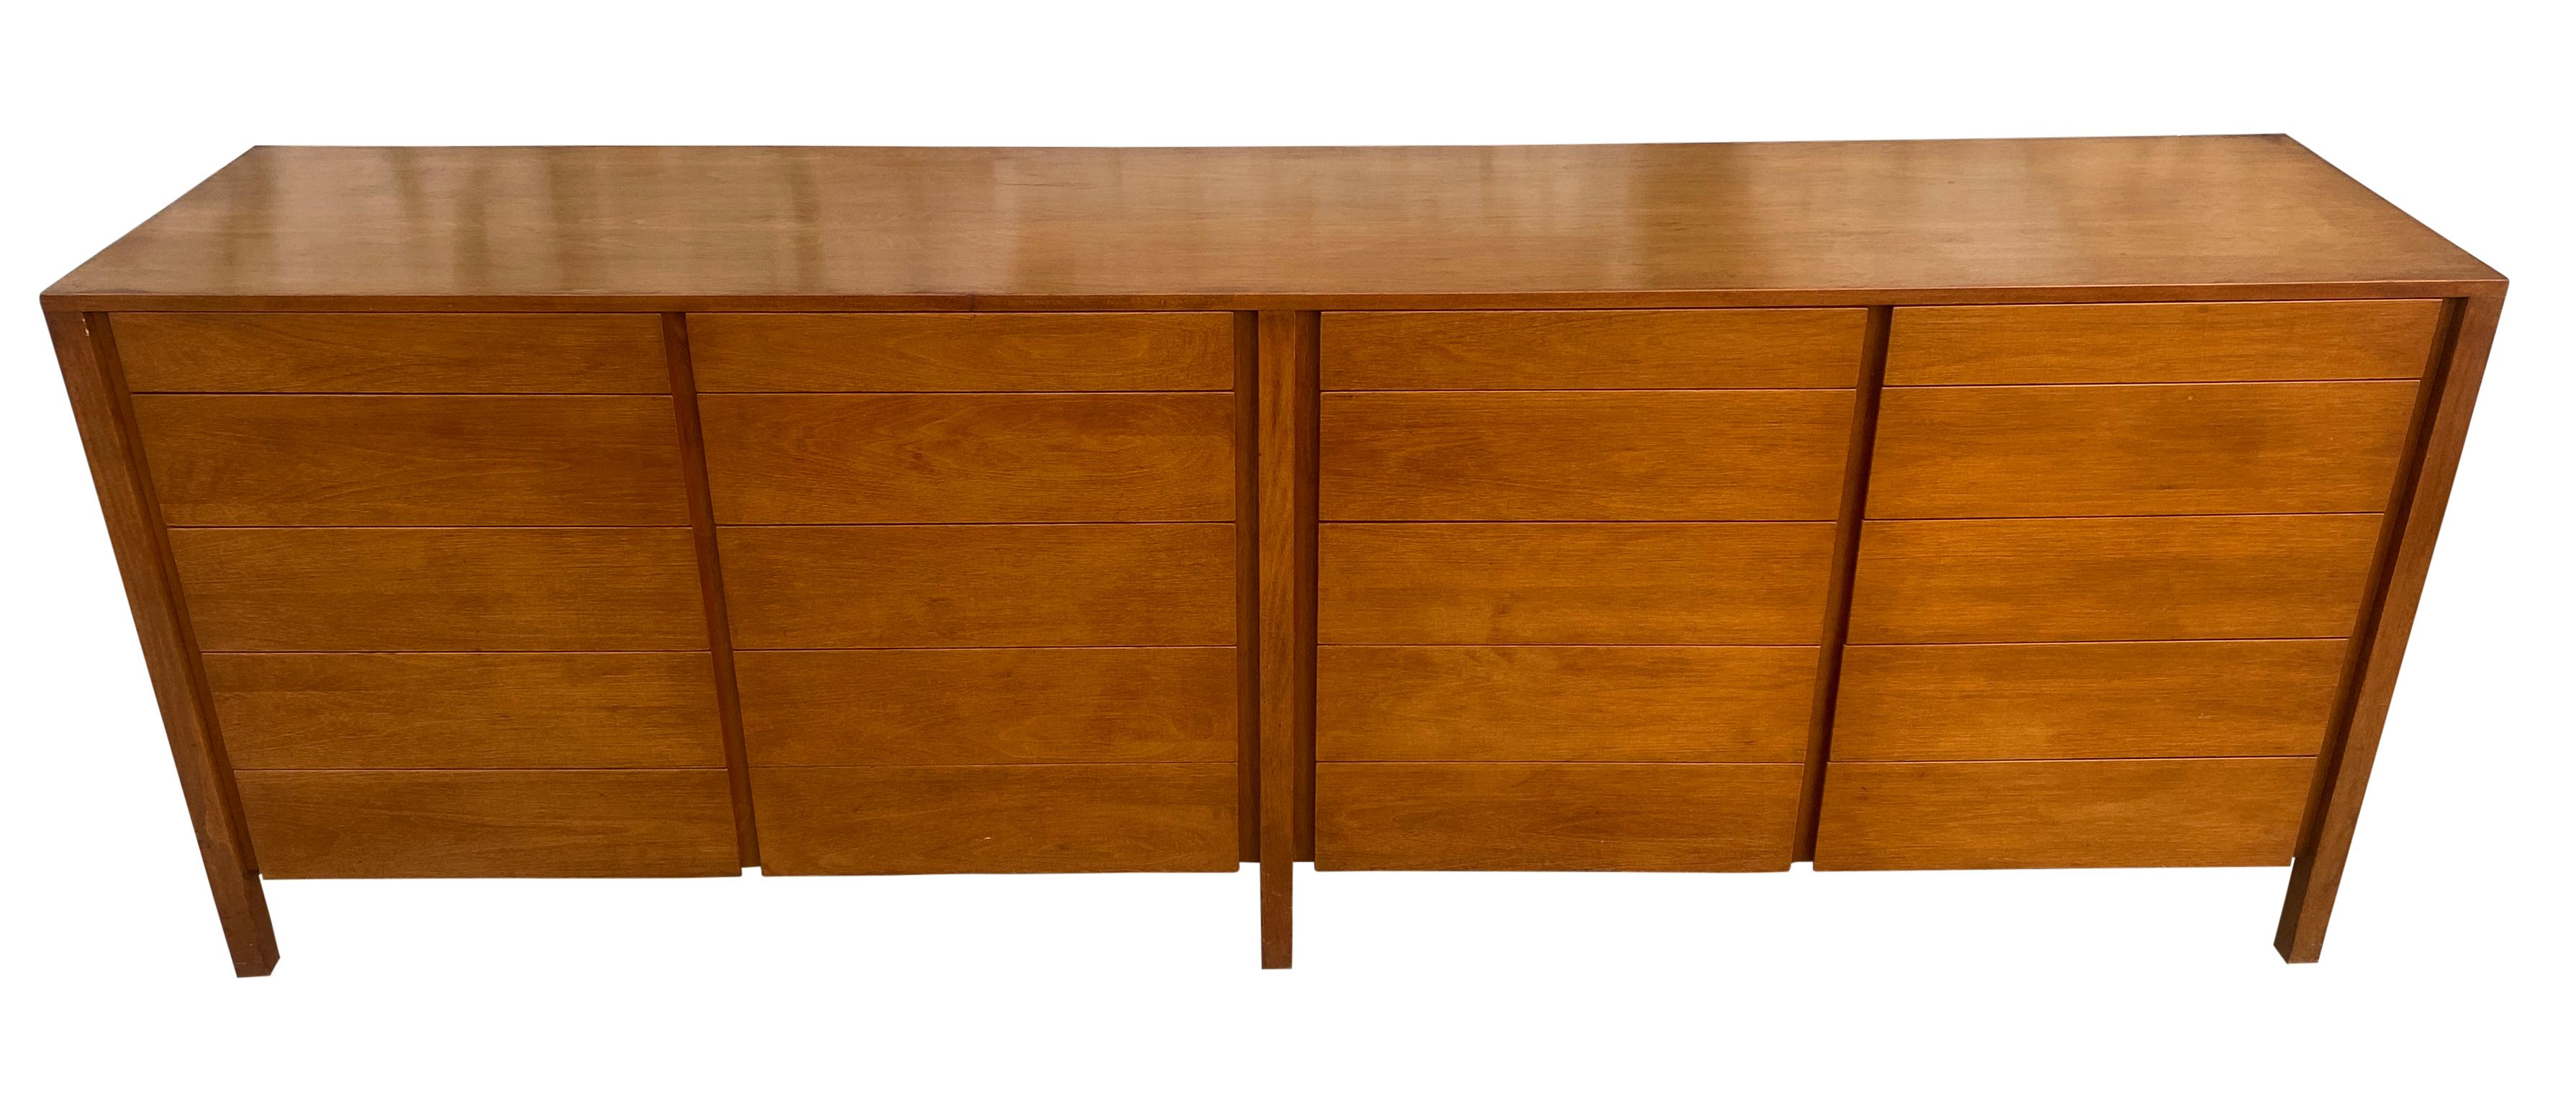 Mid-Century Modern 8' long credenza dresser or sideboard with 20 drawers custom made Danish style. Good vintage condition all drawers slide very smooth. Each drawer has different dividers that are removable. Clean inside and out. All solid wood